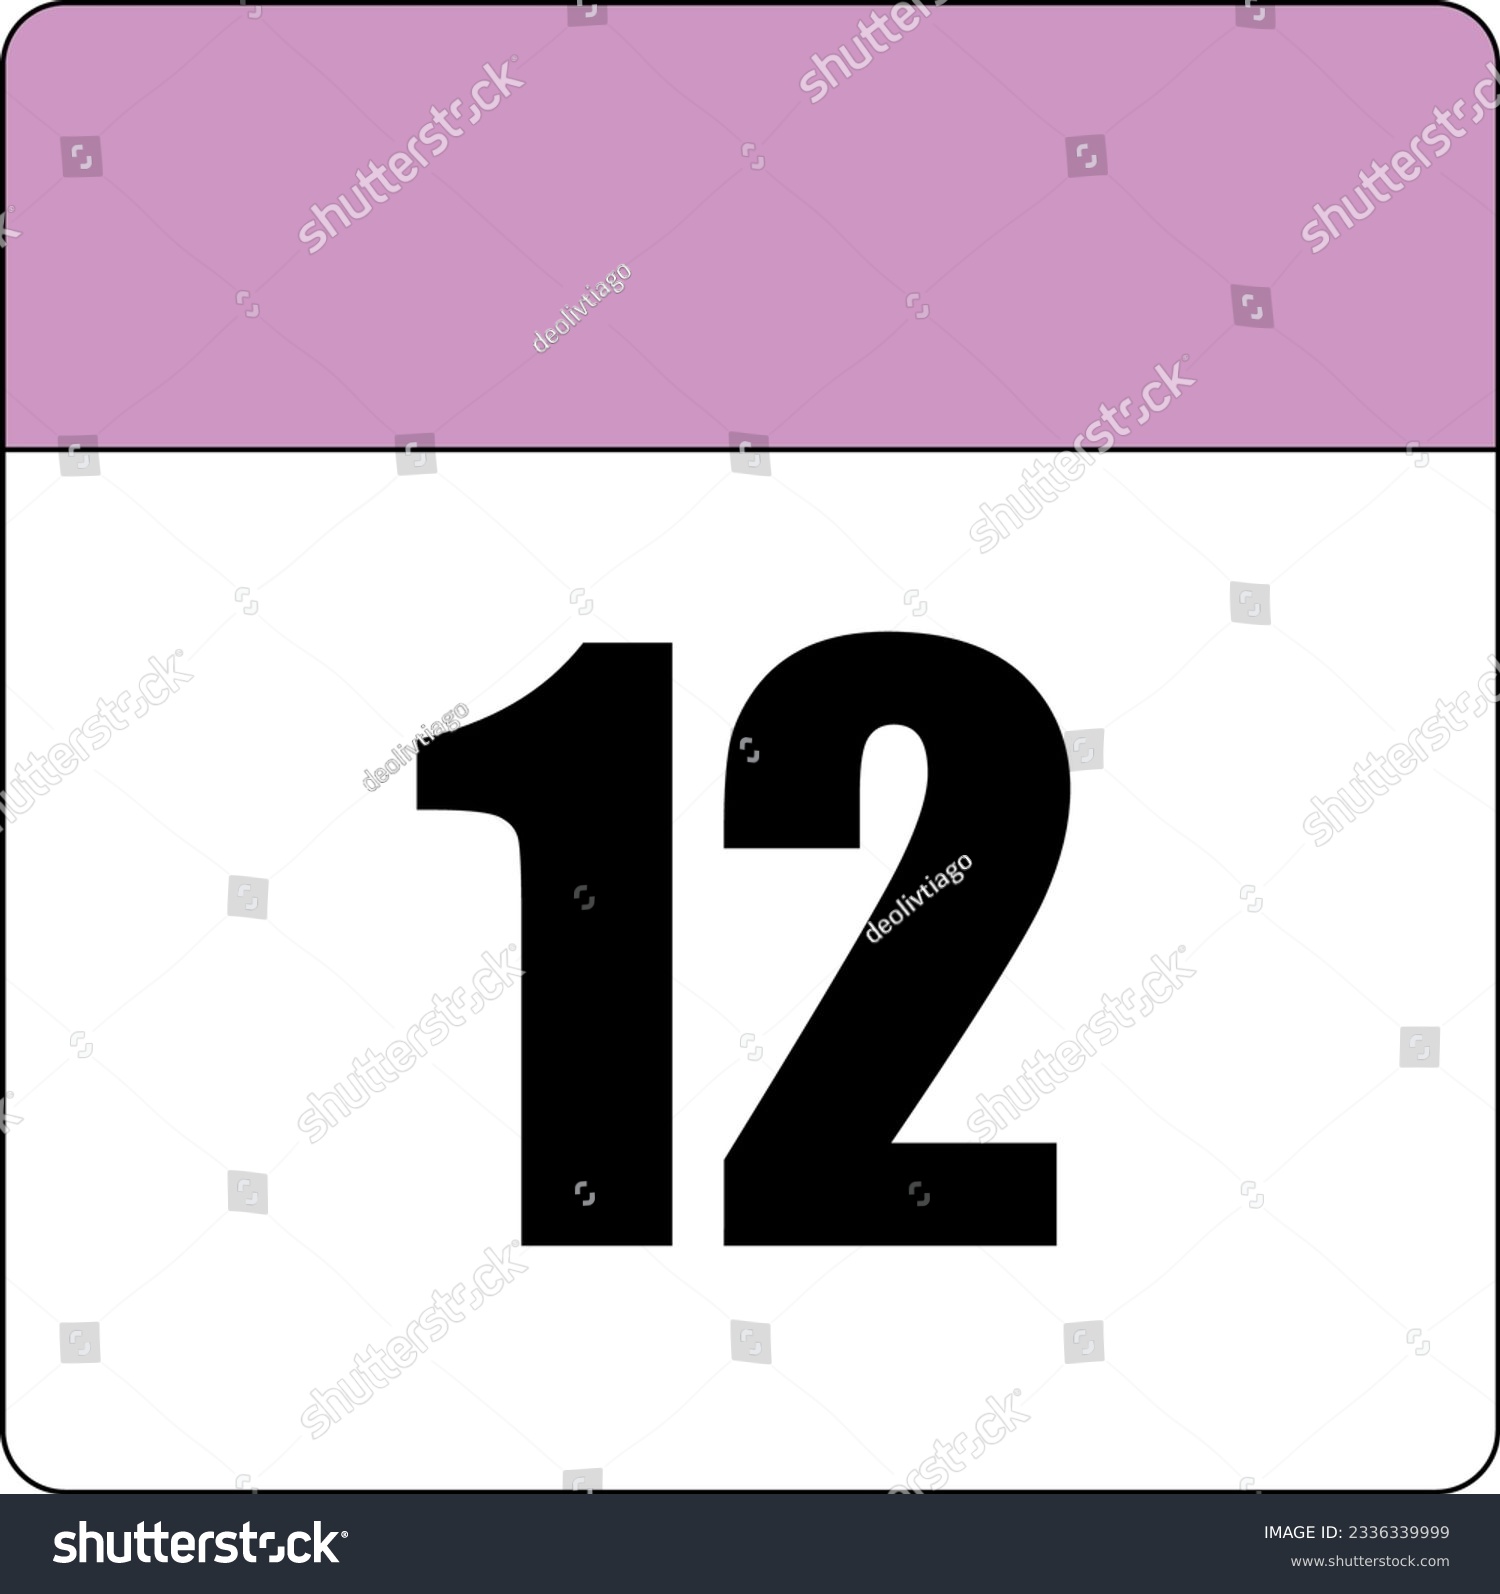 SVG of simple calendar icon with pink header and white background showing 12th day number twelve svg